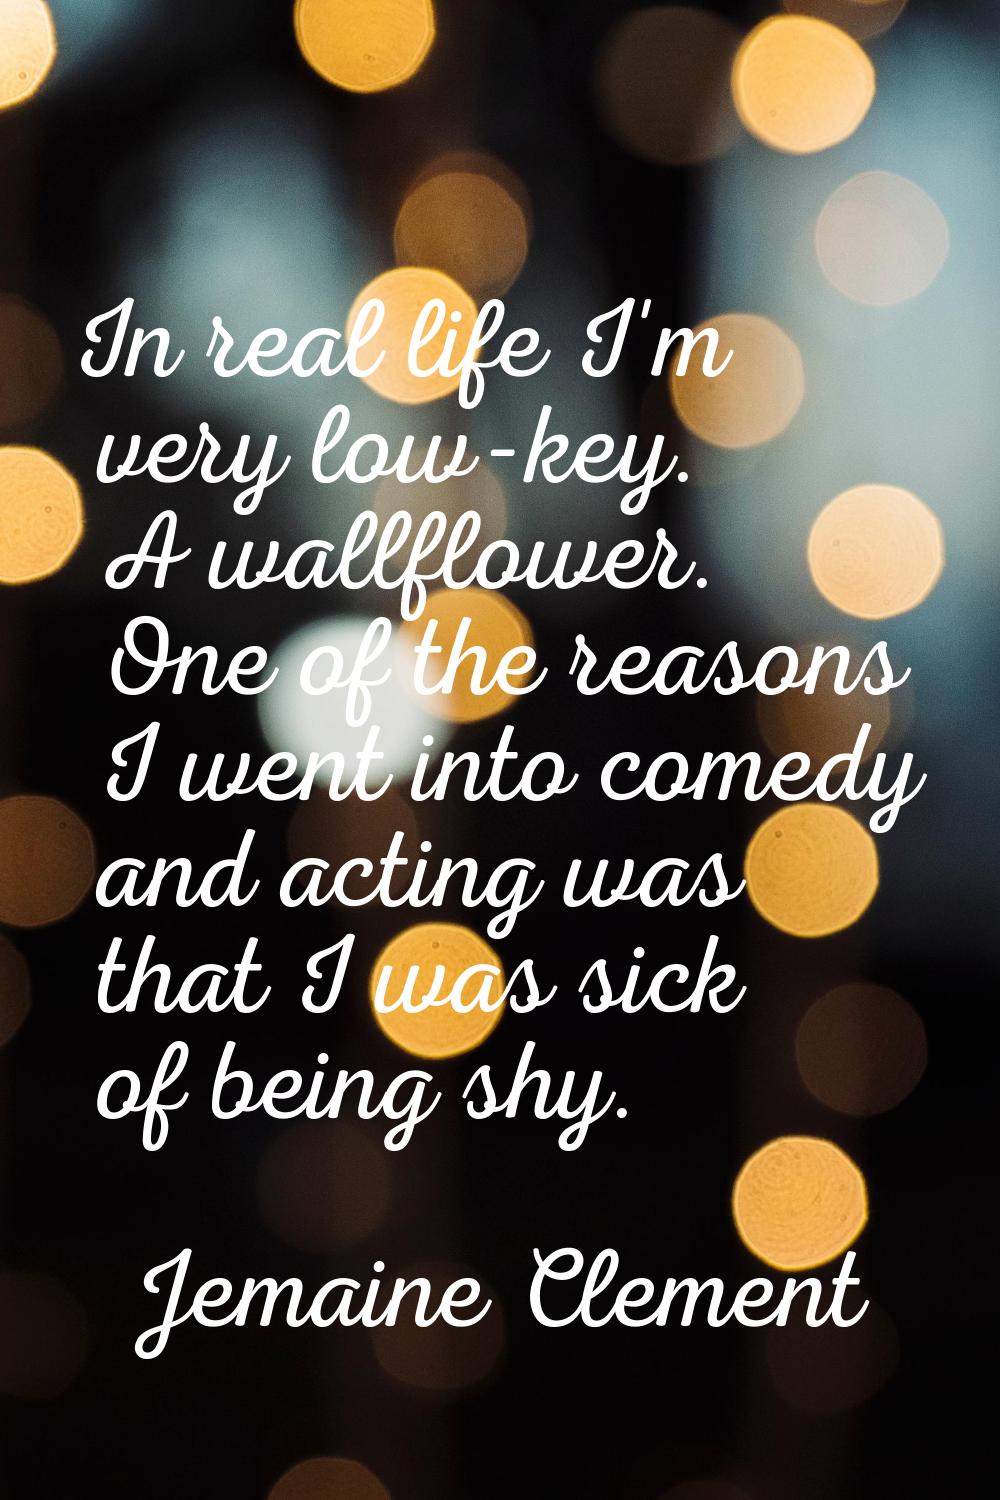 In real life I'm very low-key. A wallflower. One of the reasons I went into comedy and acting was t